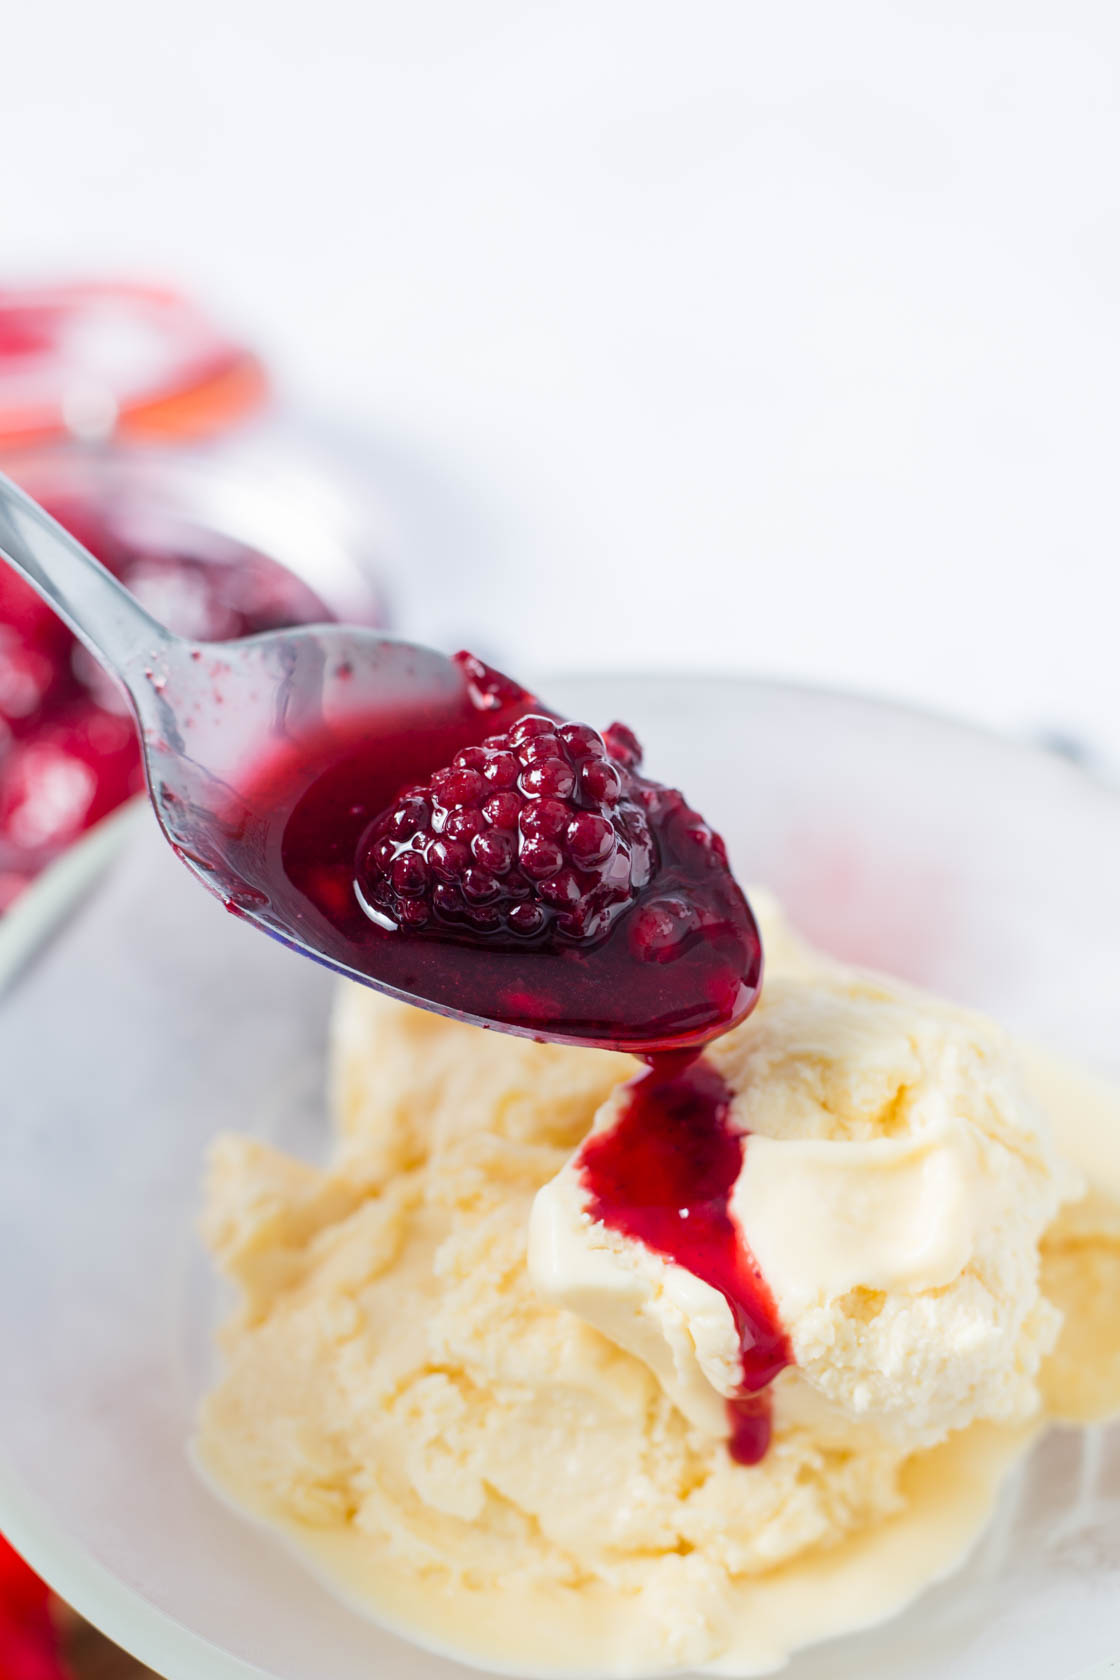 Mixed Berry Compote using Frozen Berries